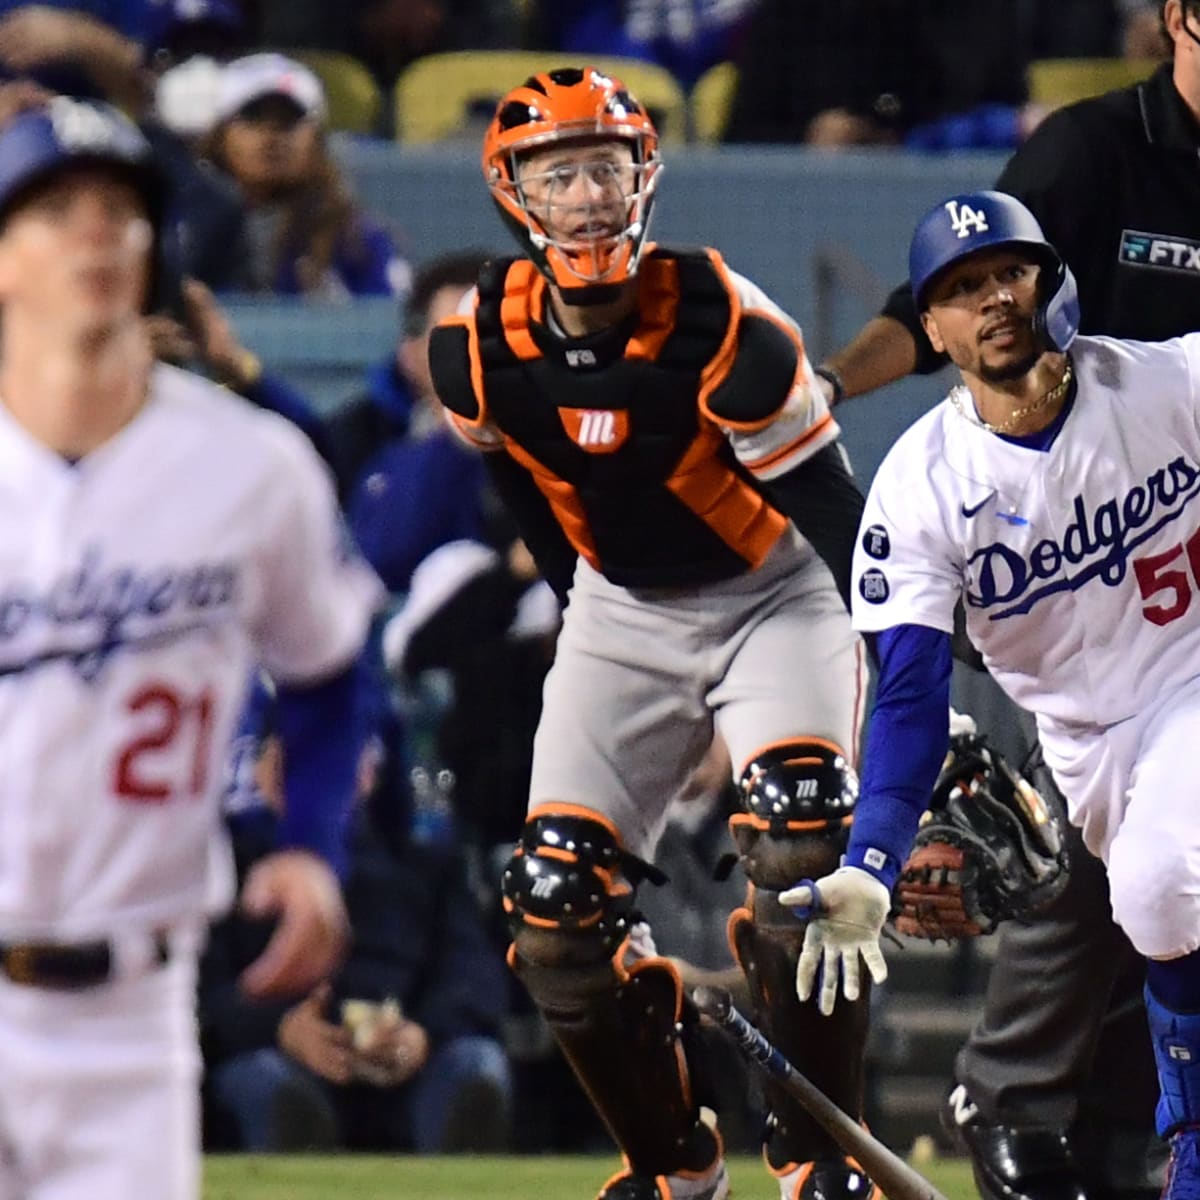 Dodgers-Giants series pushed to the ultimate winner-take-all game